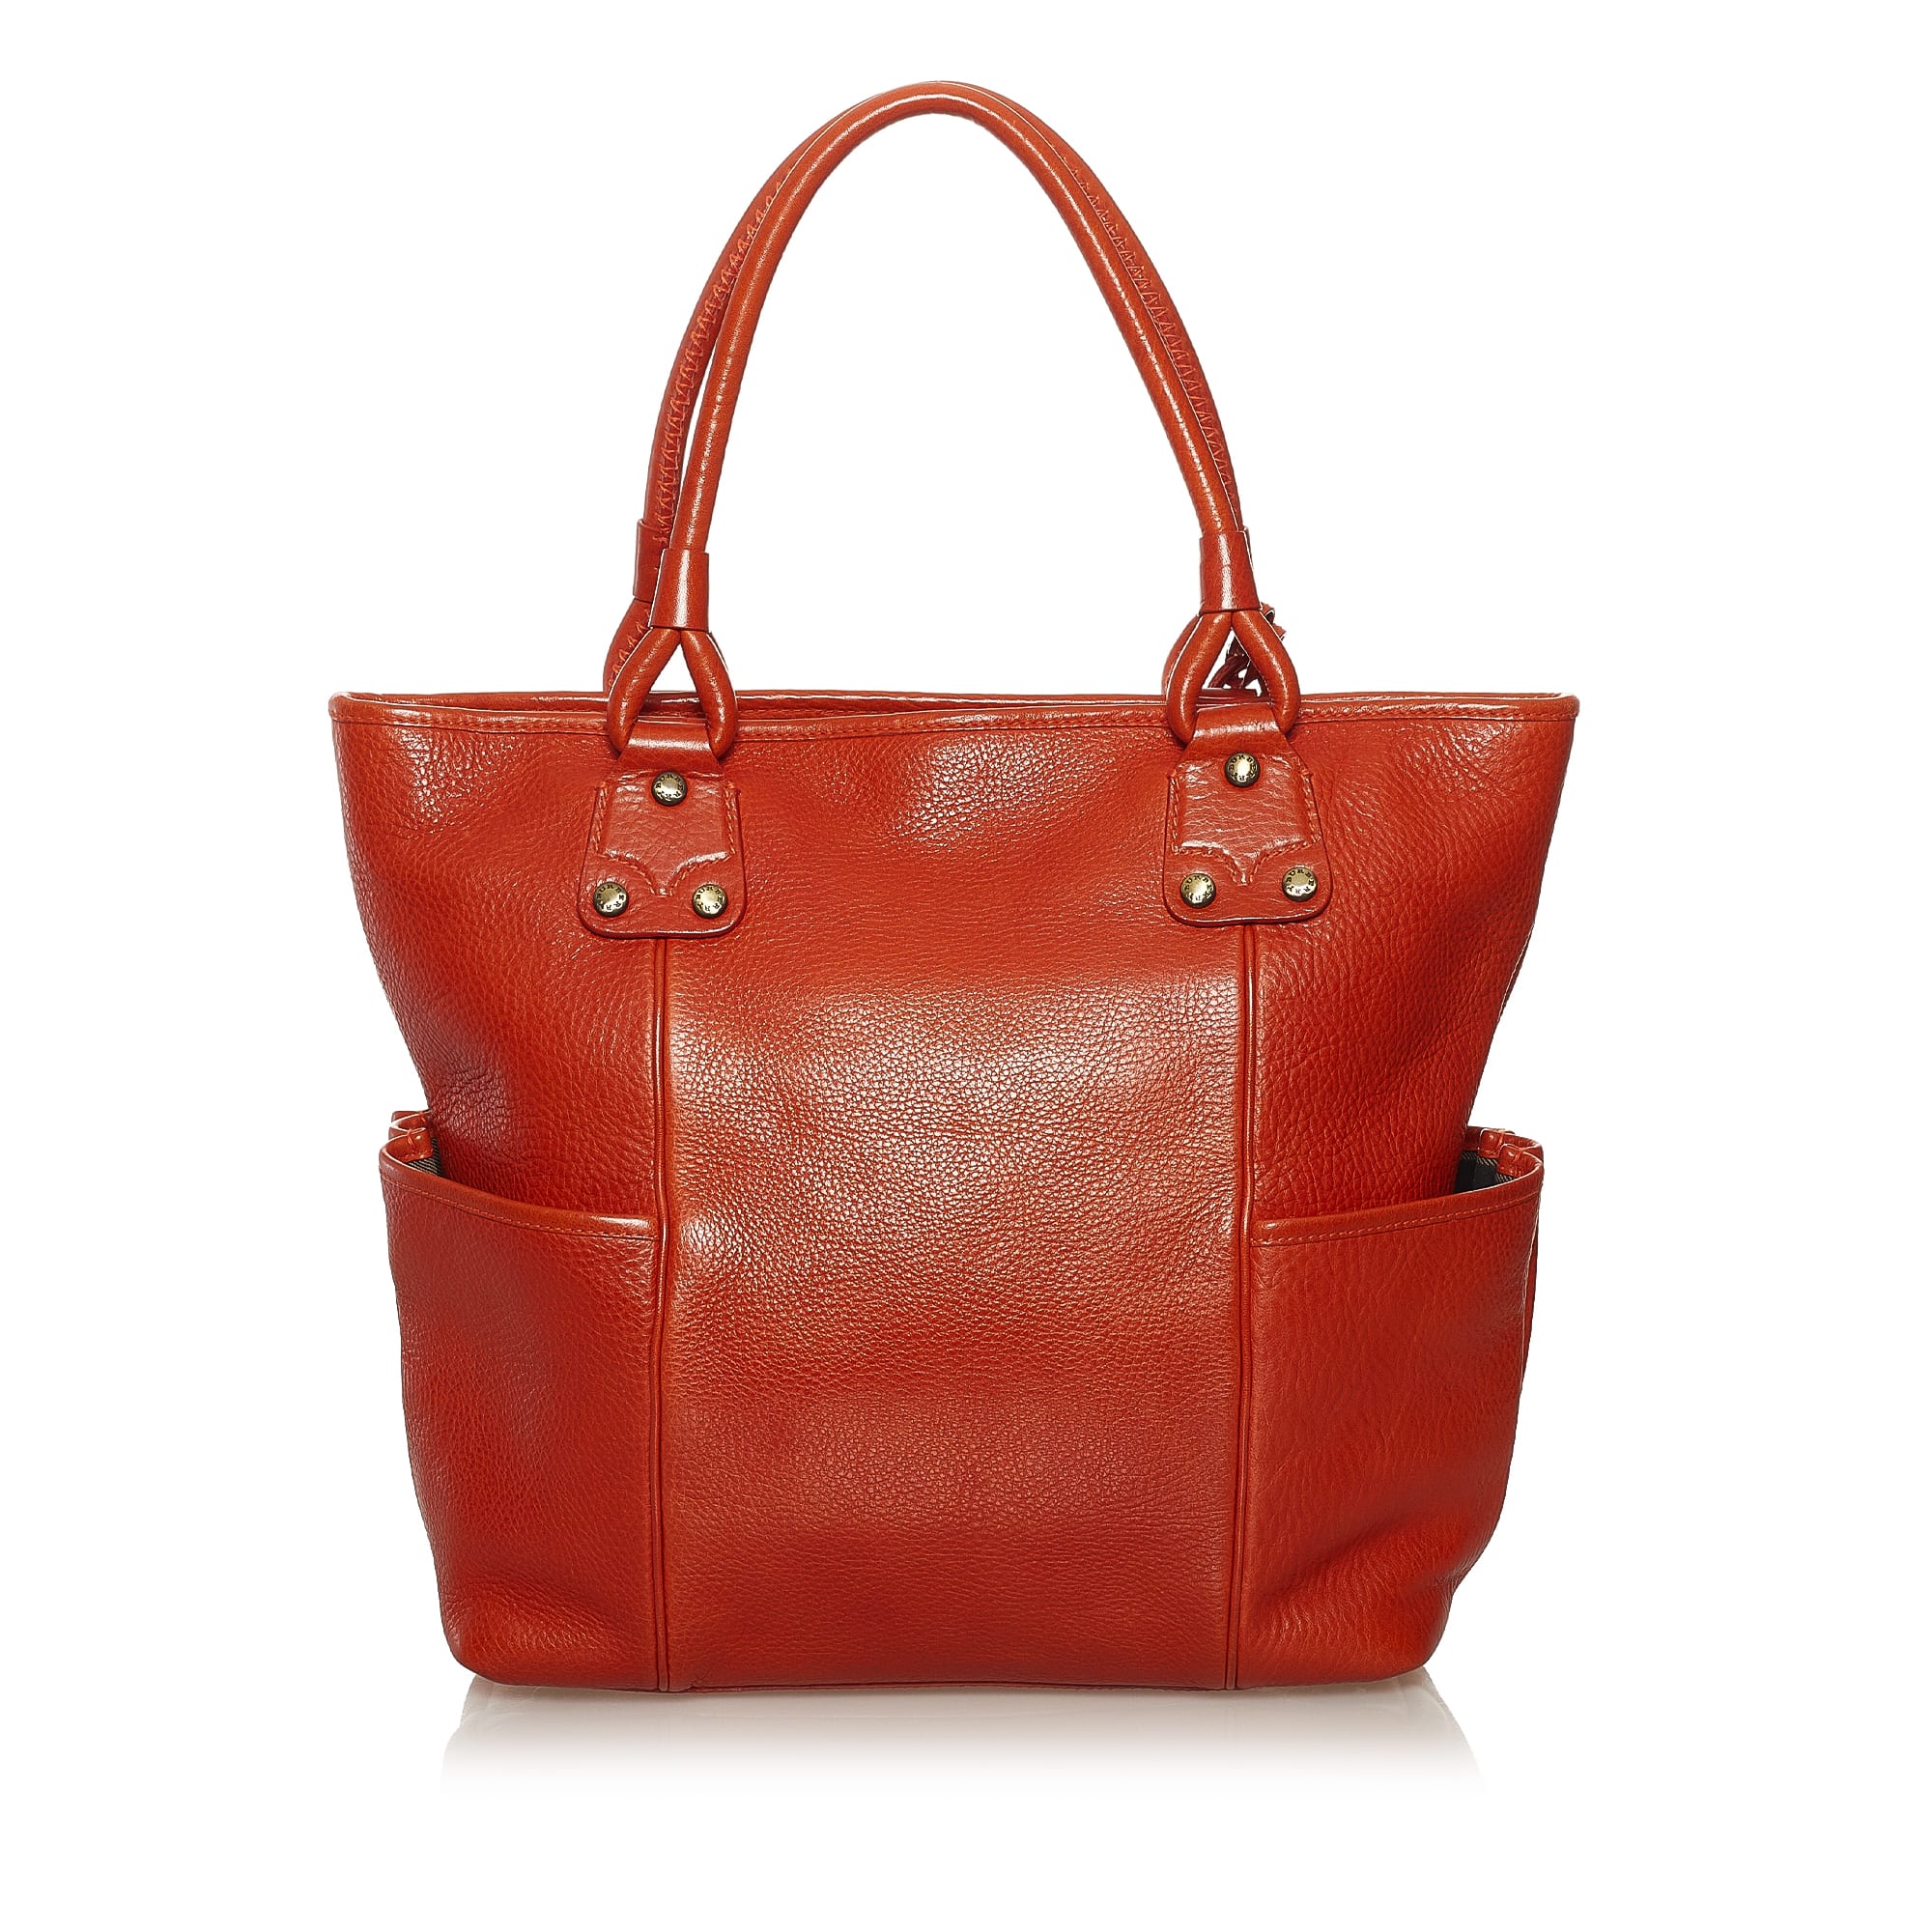 Burberry Leather Tote Bag, ONESIZE